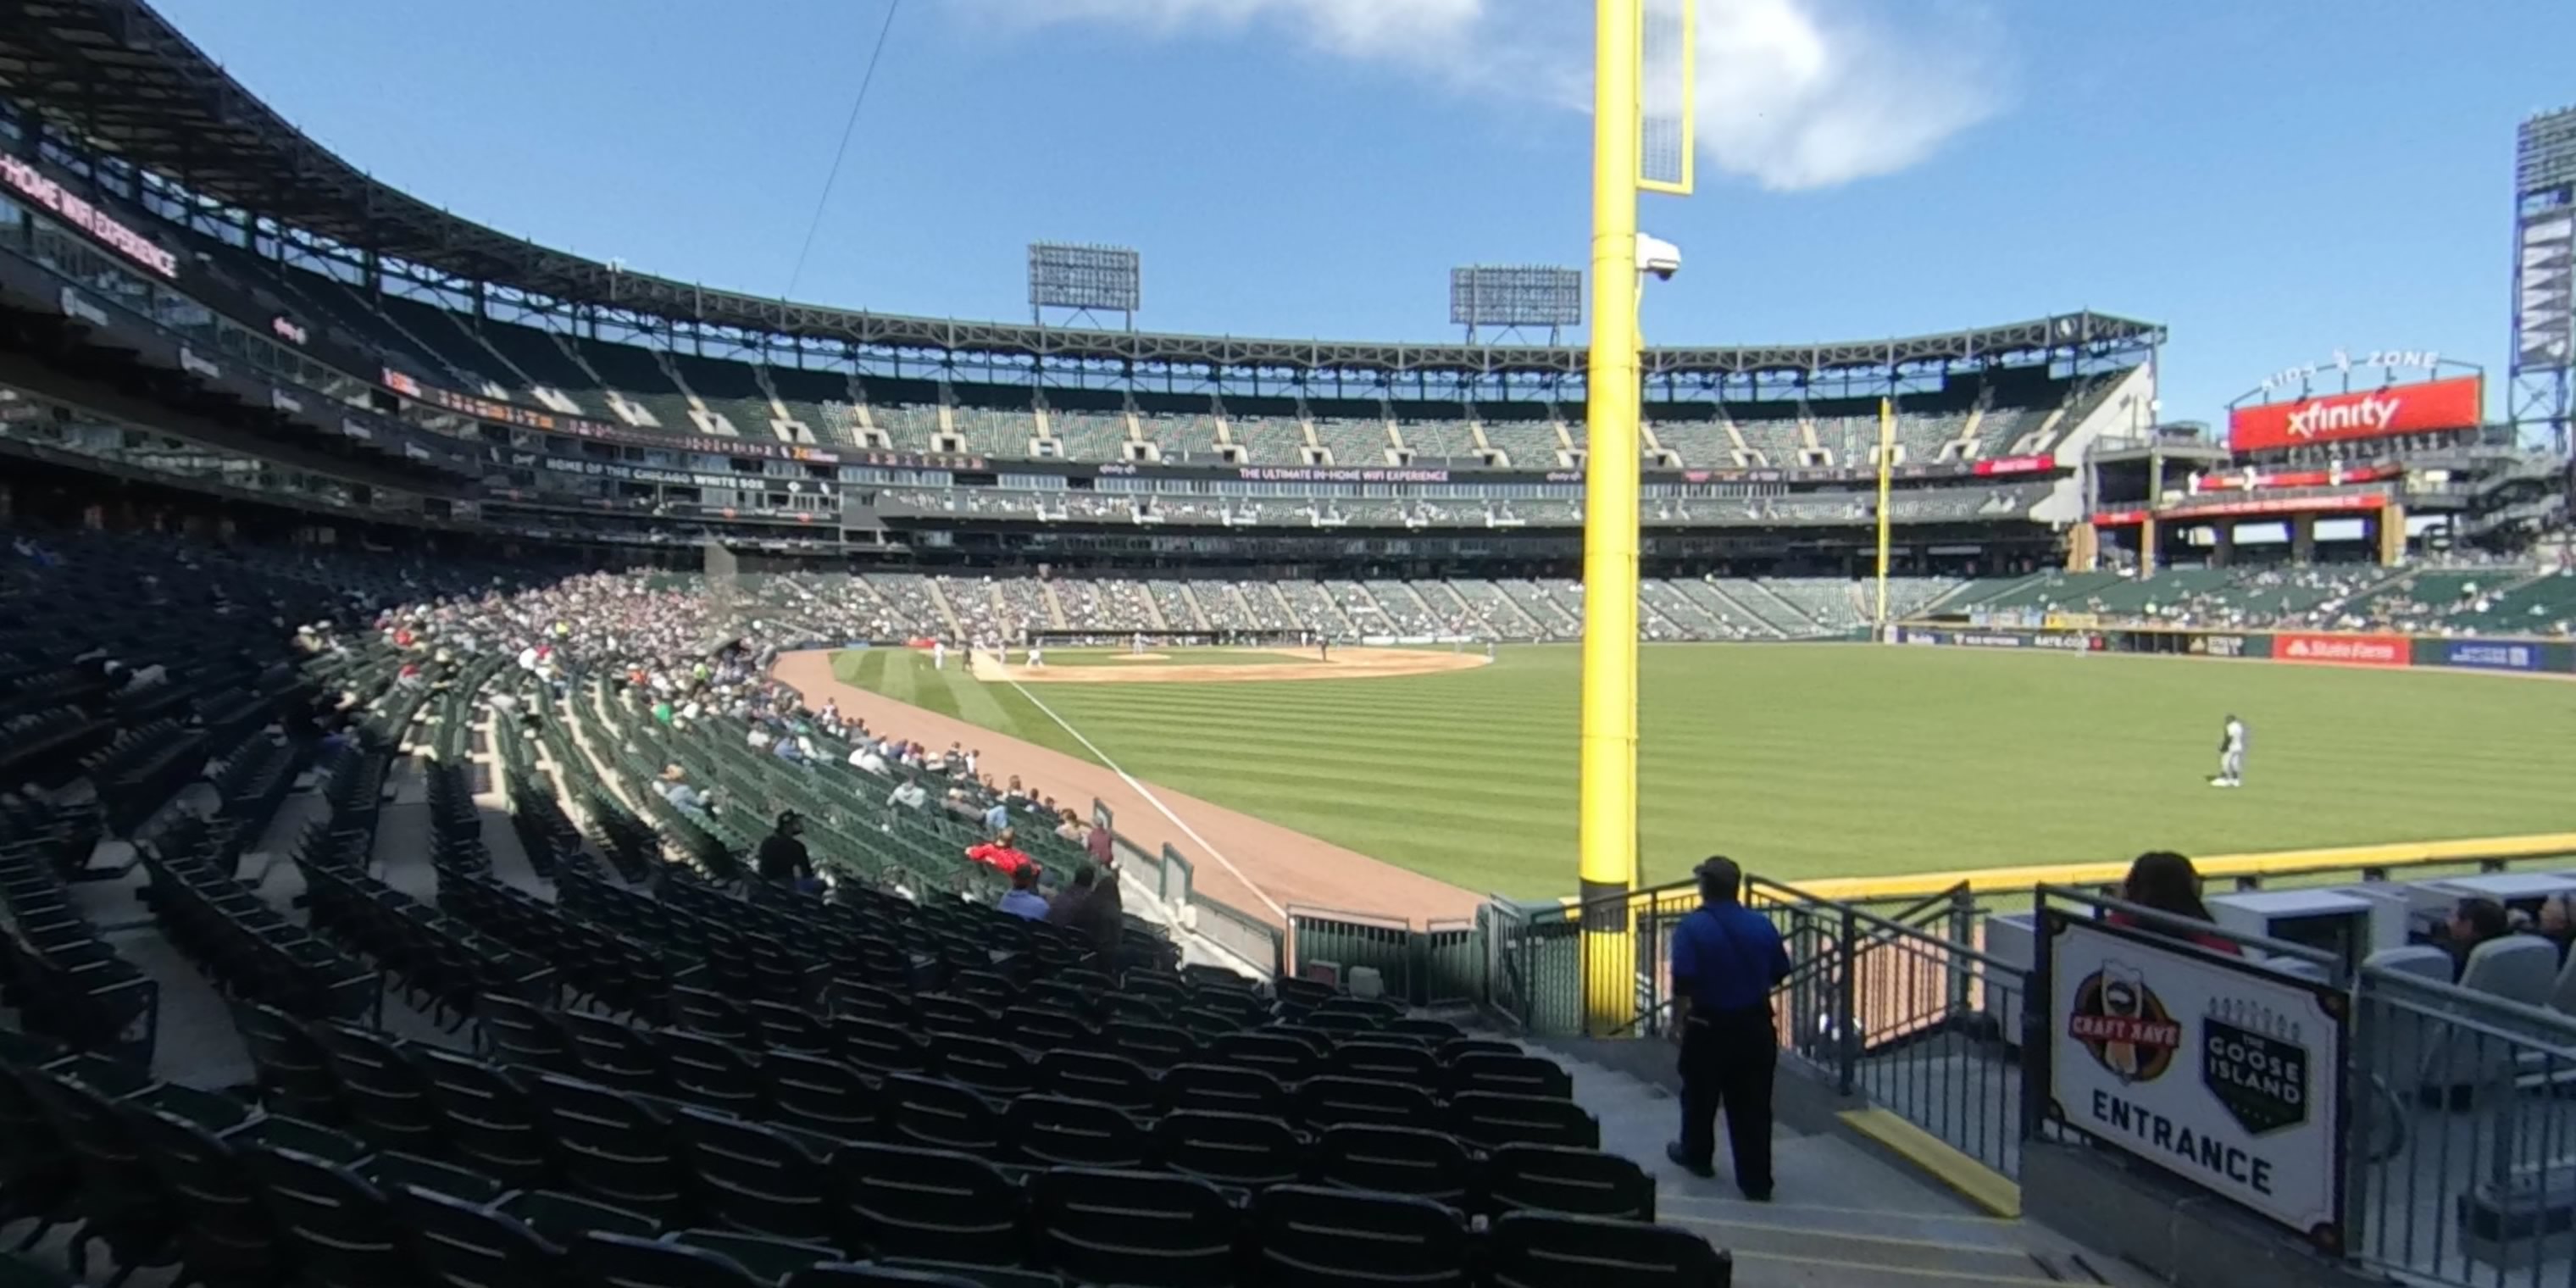 section 108 panoramic seat view  - guaranteed rate field